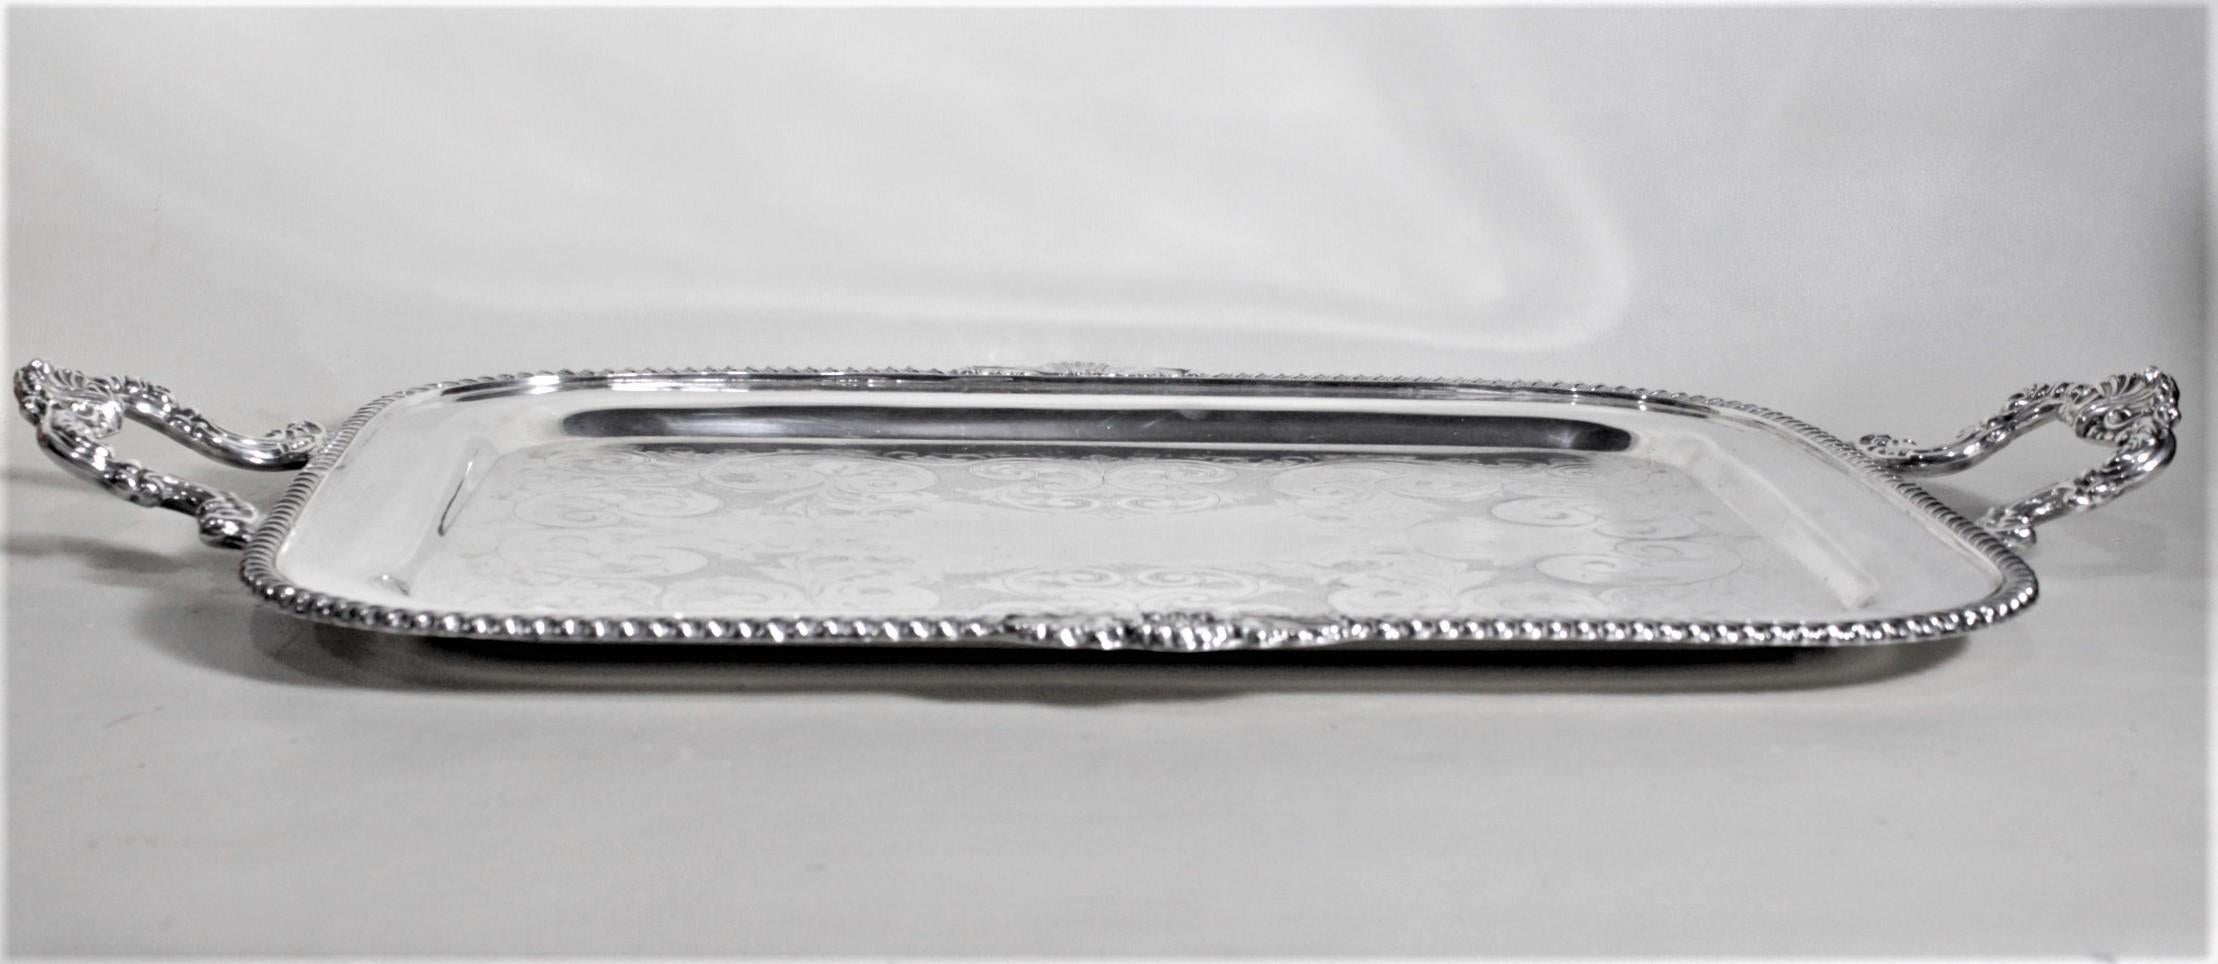 Victorian Antique Styled Silver Plated Serving Tray with Ornate Engraving & Handles